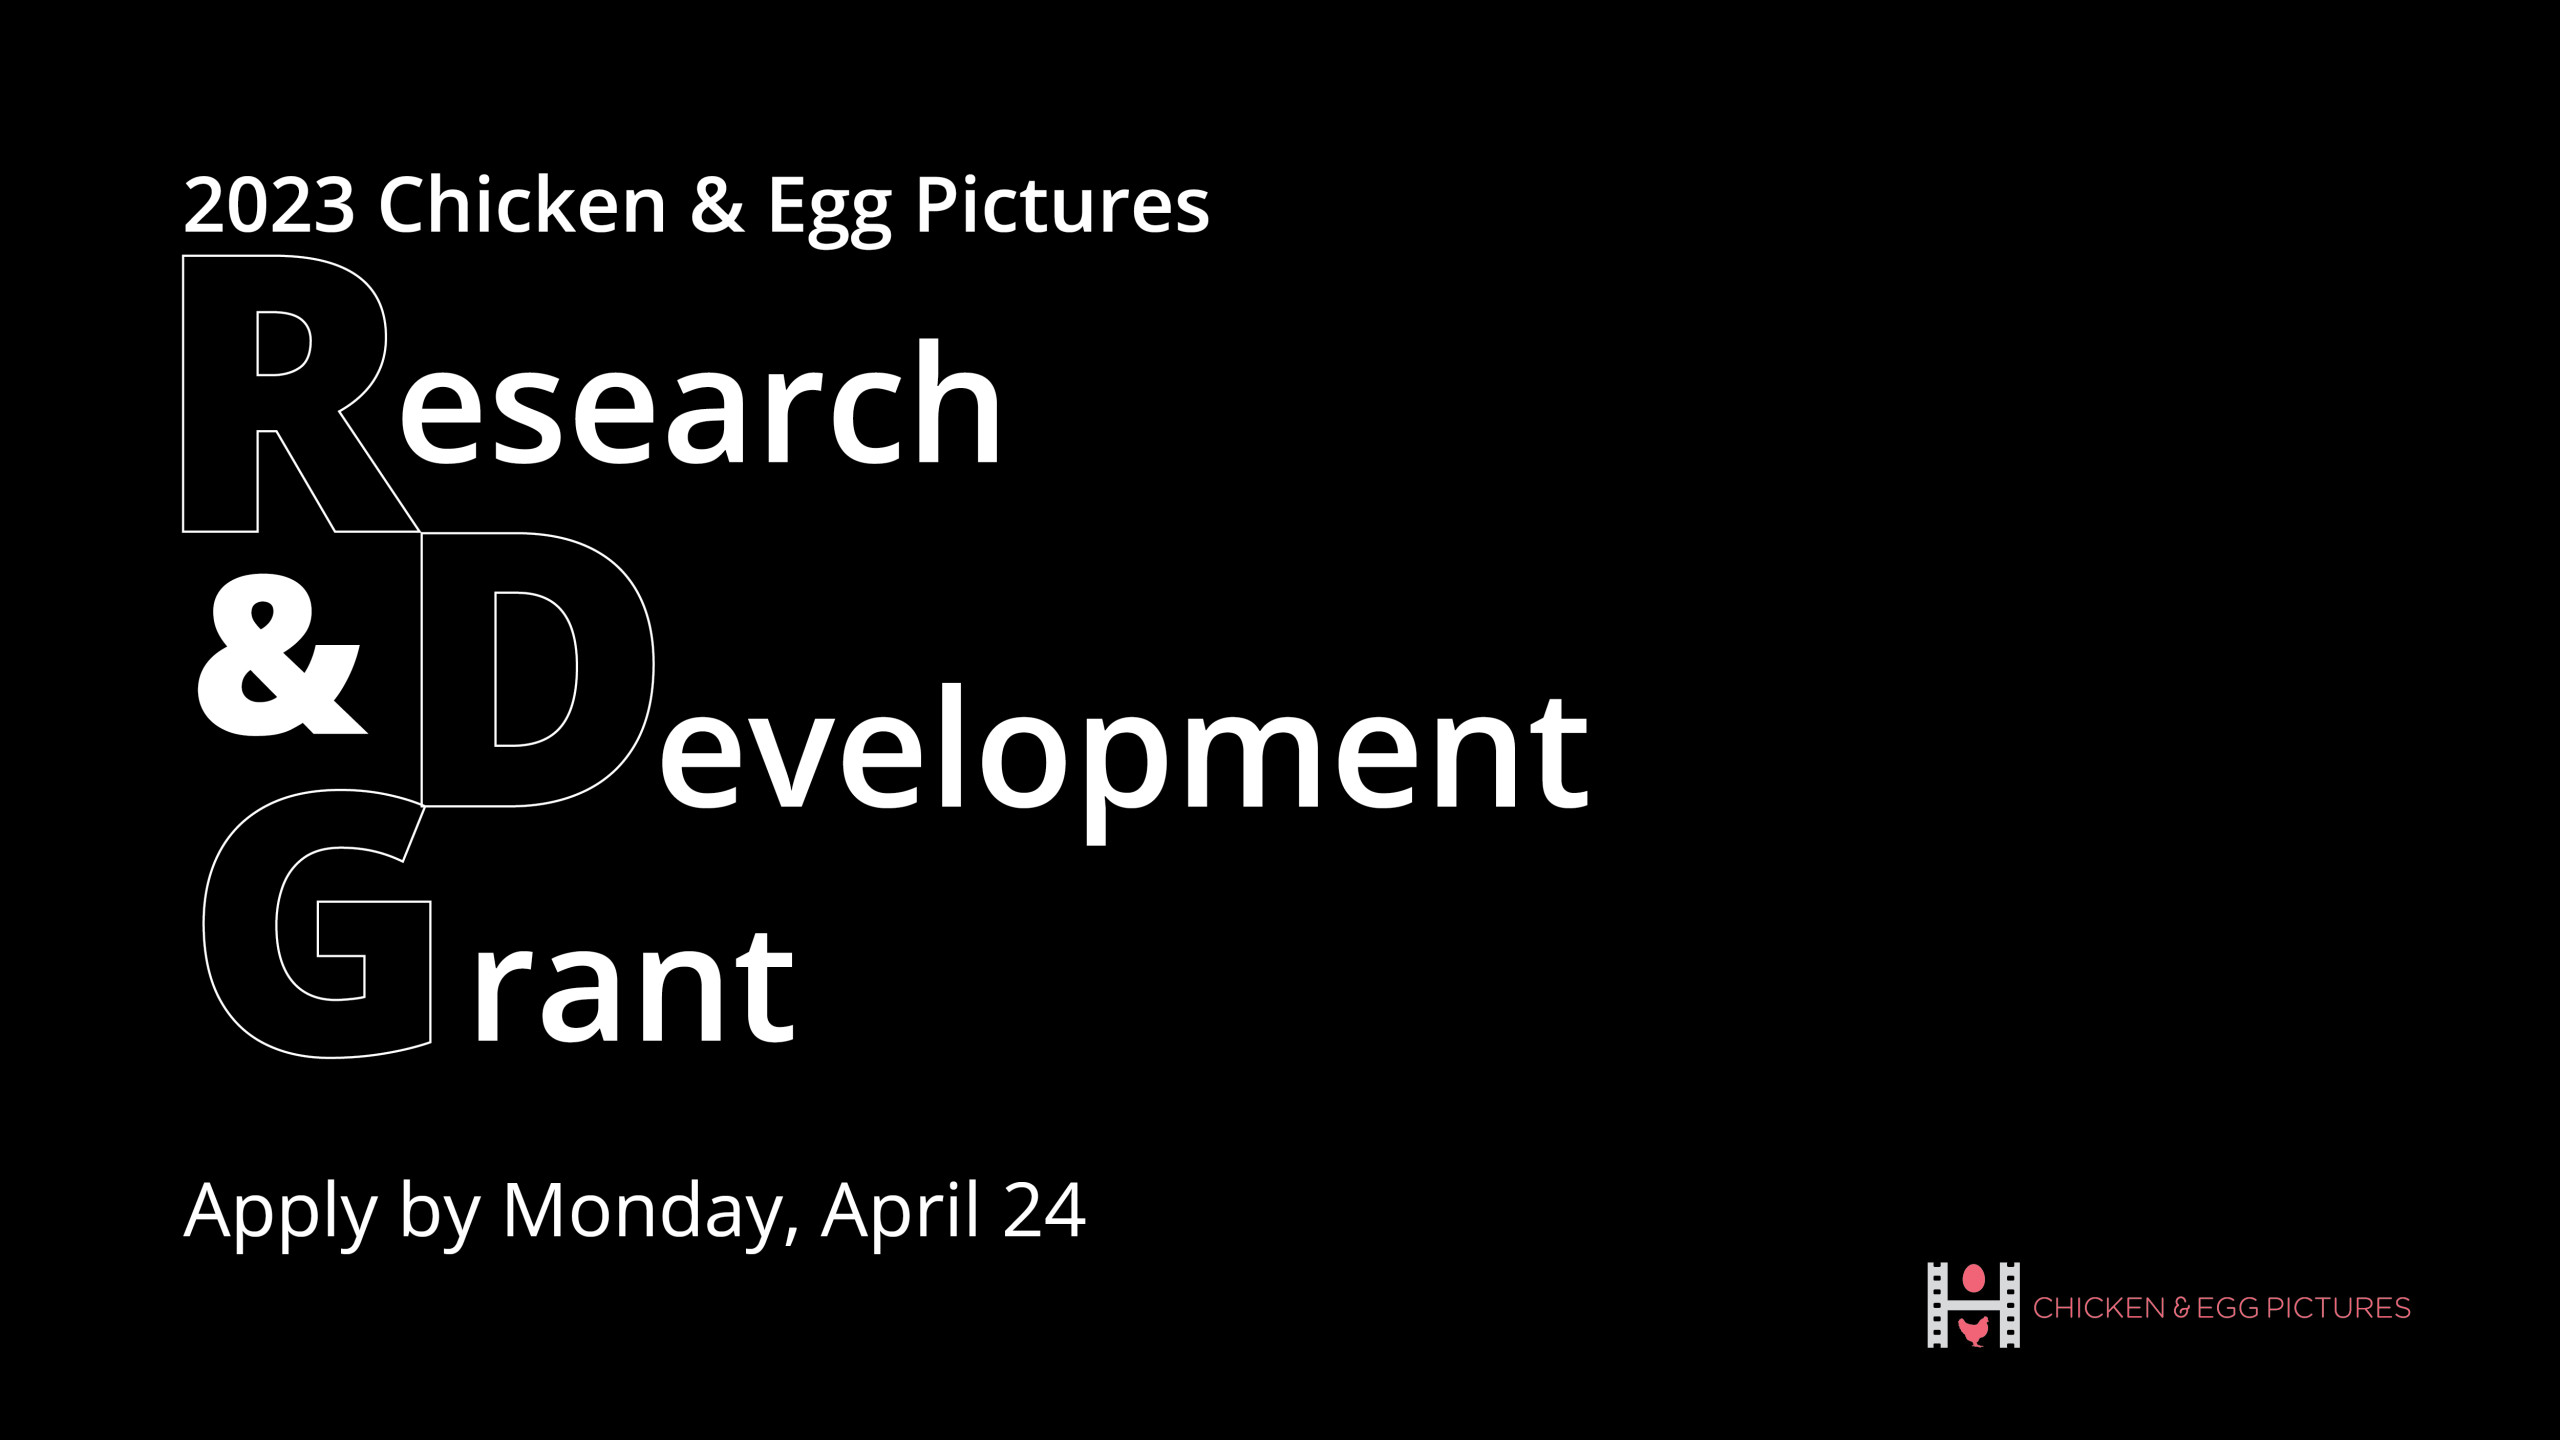  Chicken & Egg Pictures Launches New Research and Development Grants to Documentary Filmmaking Teams, With Support From Netflix